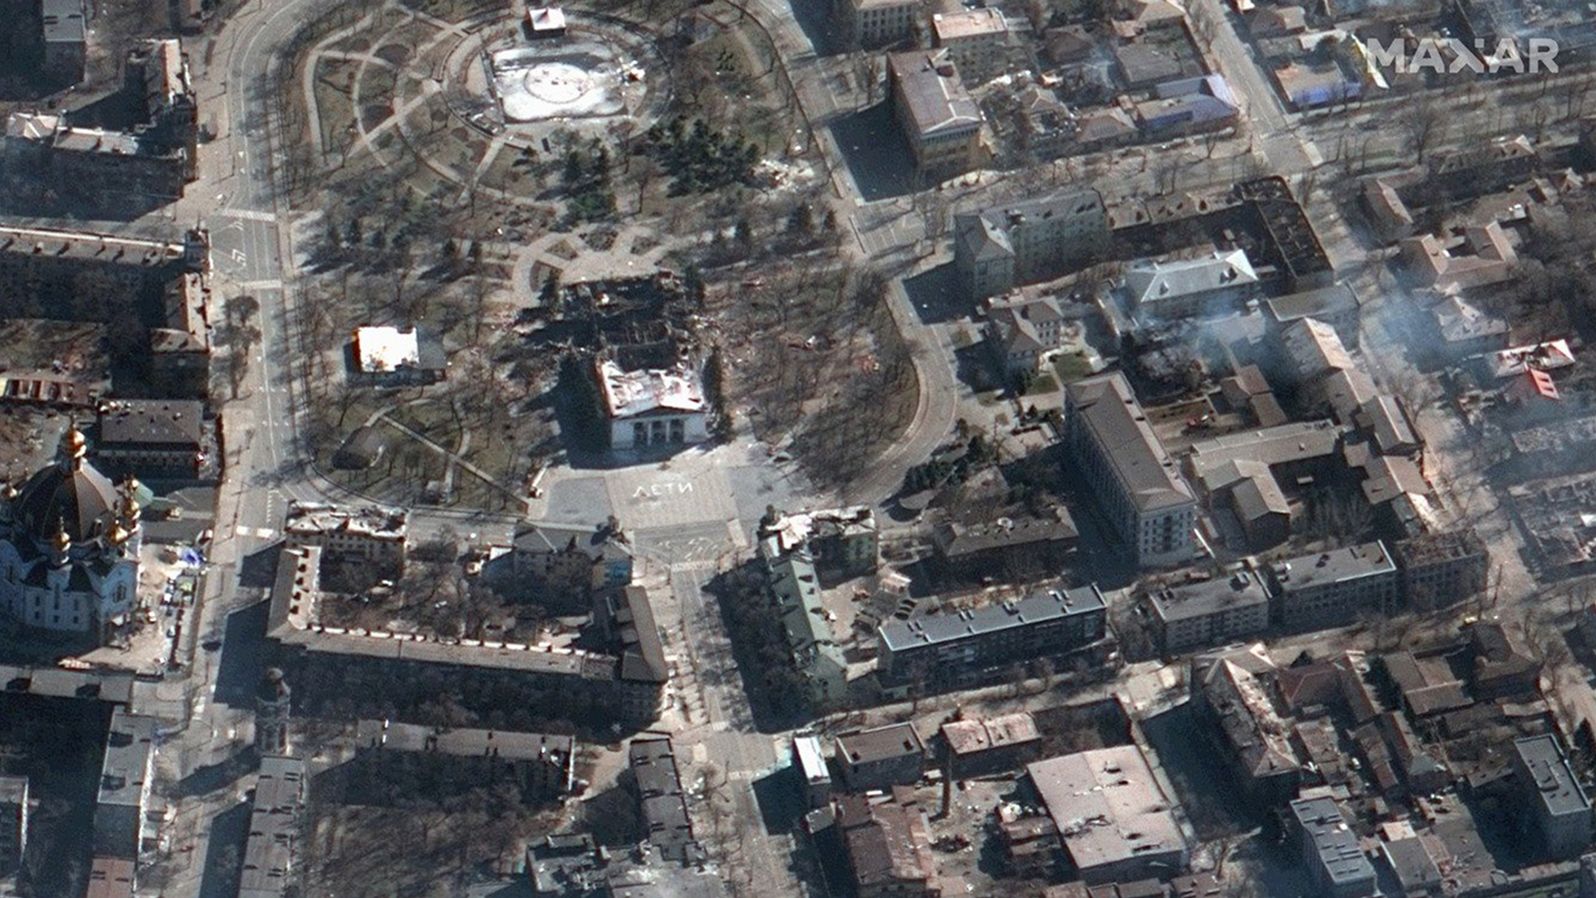 A Maxar satellite image shows the bombed out Mariupol theater.